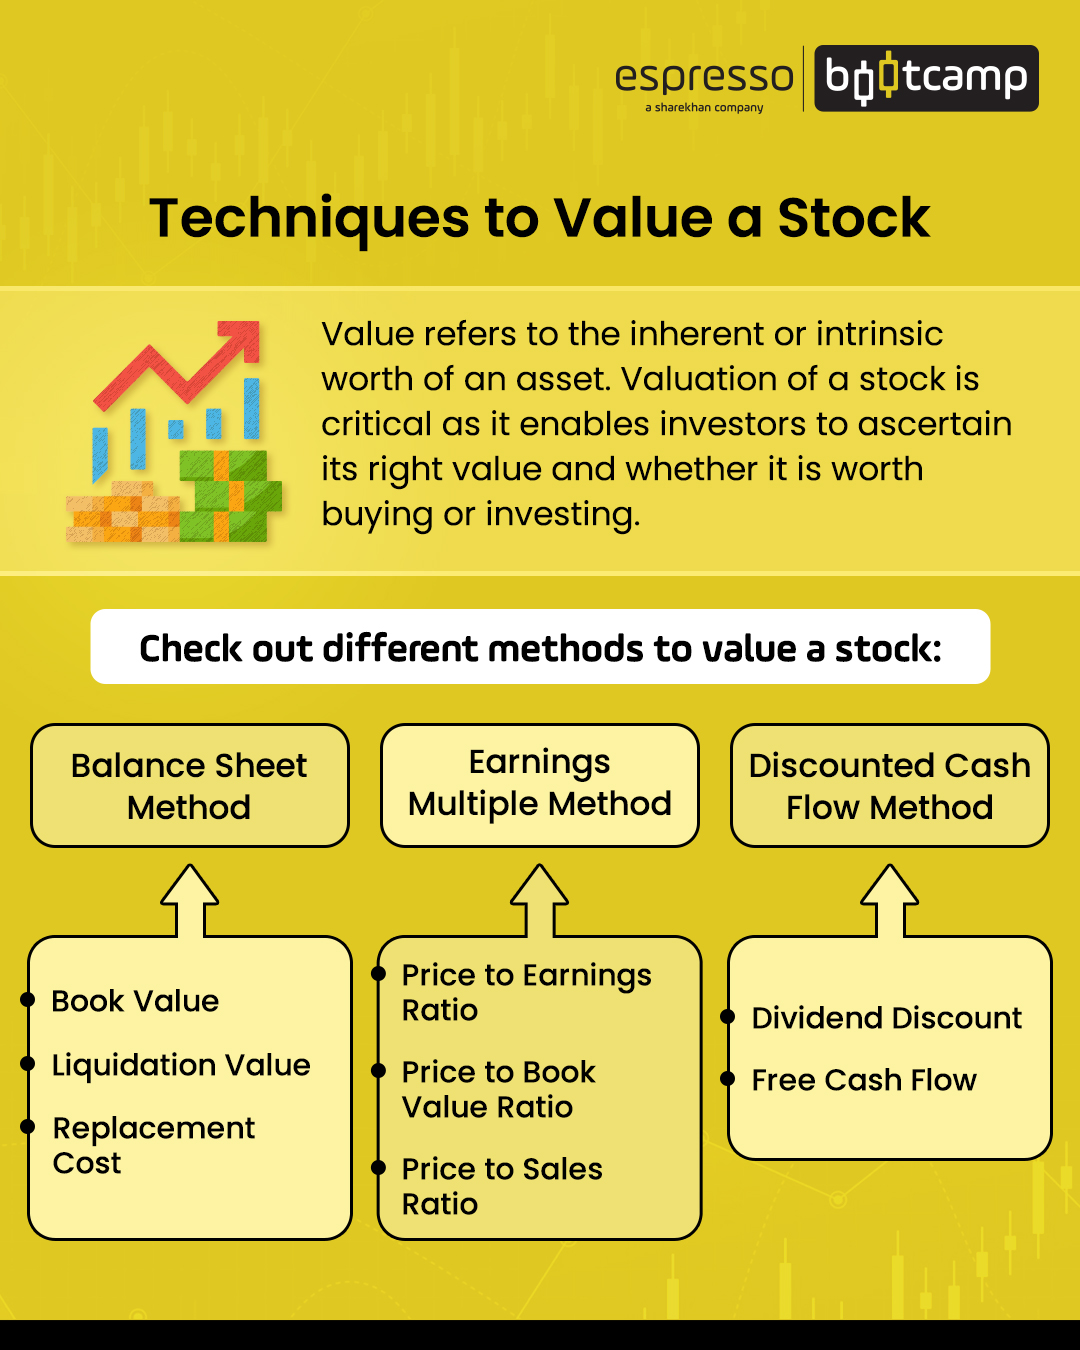 Techniques to Value a Stock